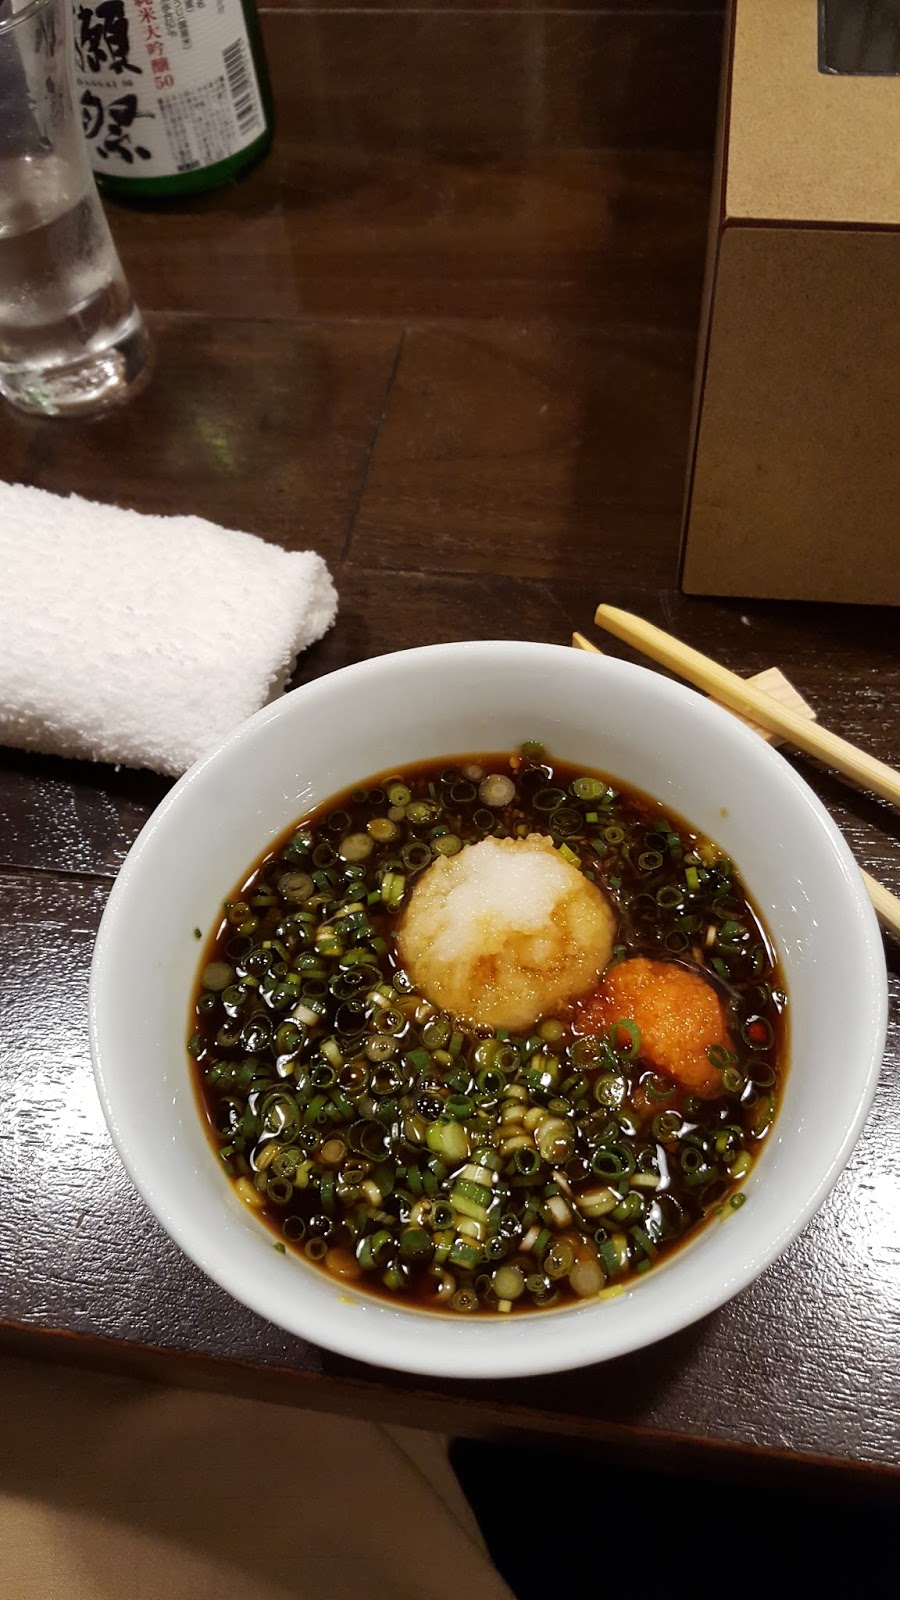 Red Bread Tie: My Trip To Japan: Puffer Fish Meal